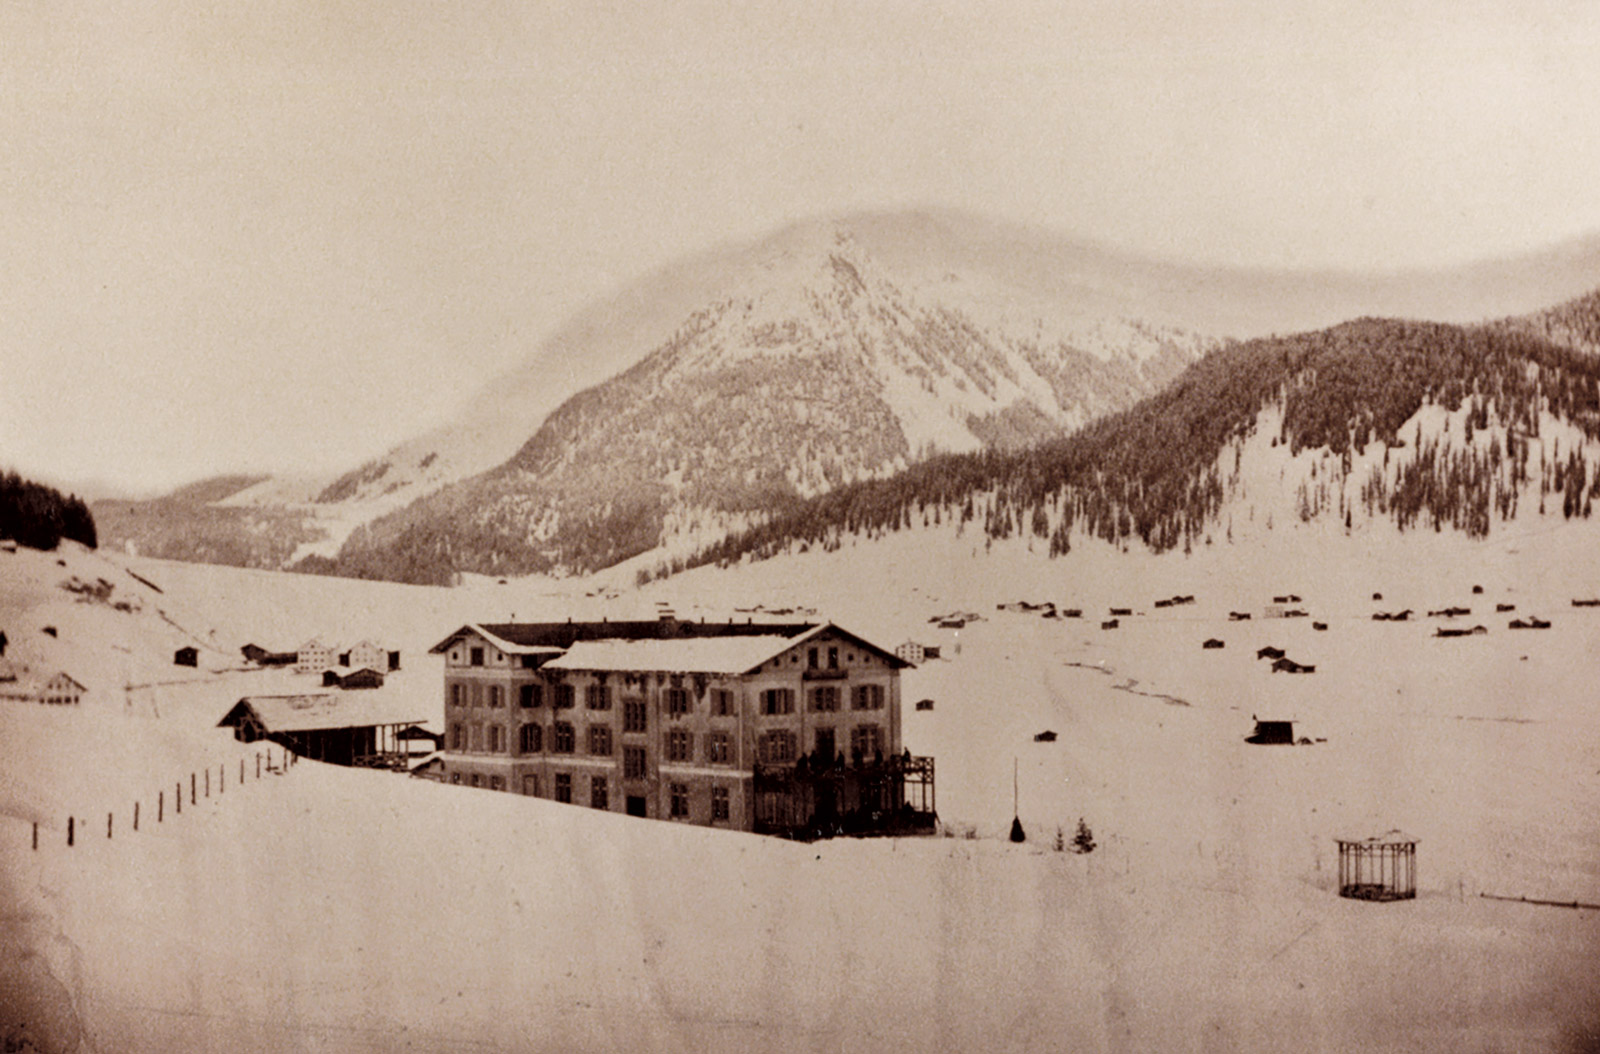 Dr. Spengler’s original sanatorium in Davos, built in 1868. The building was destroyed in a fire in 1872, and new, larger facilities were erected nearby. Courtesy Gemeinde Davos Dokumentationsbibliothek.